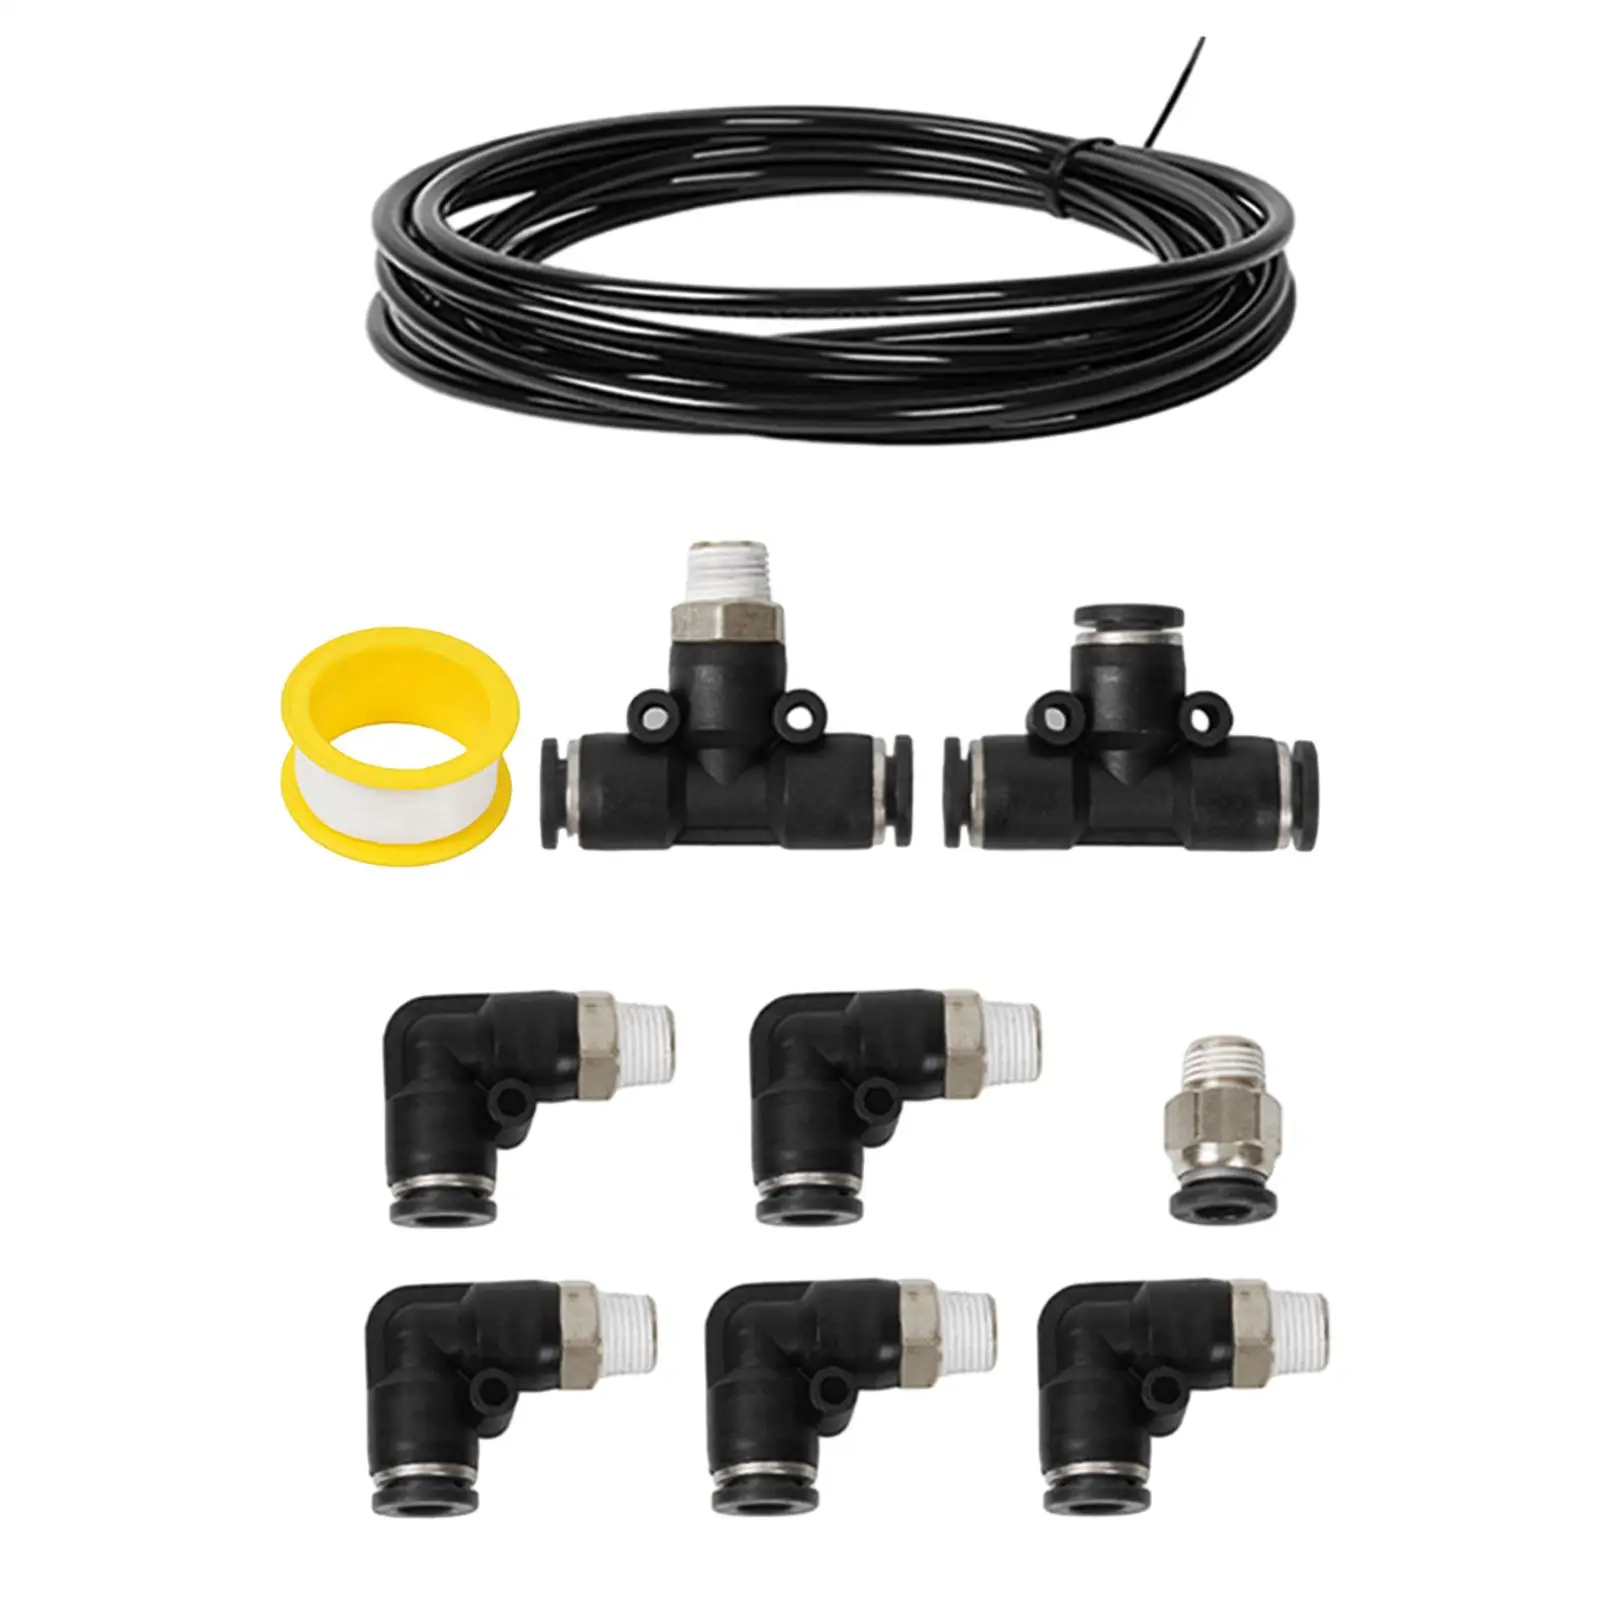 Wastegate Solenoid Connector Set Plug and Play Vacuum Fitting Kit for Vehicles Vehicle Spare Parts Easily Install Durable